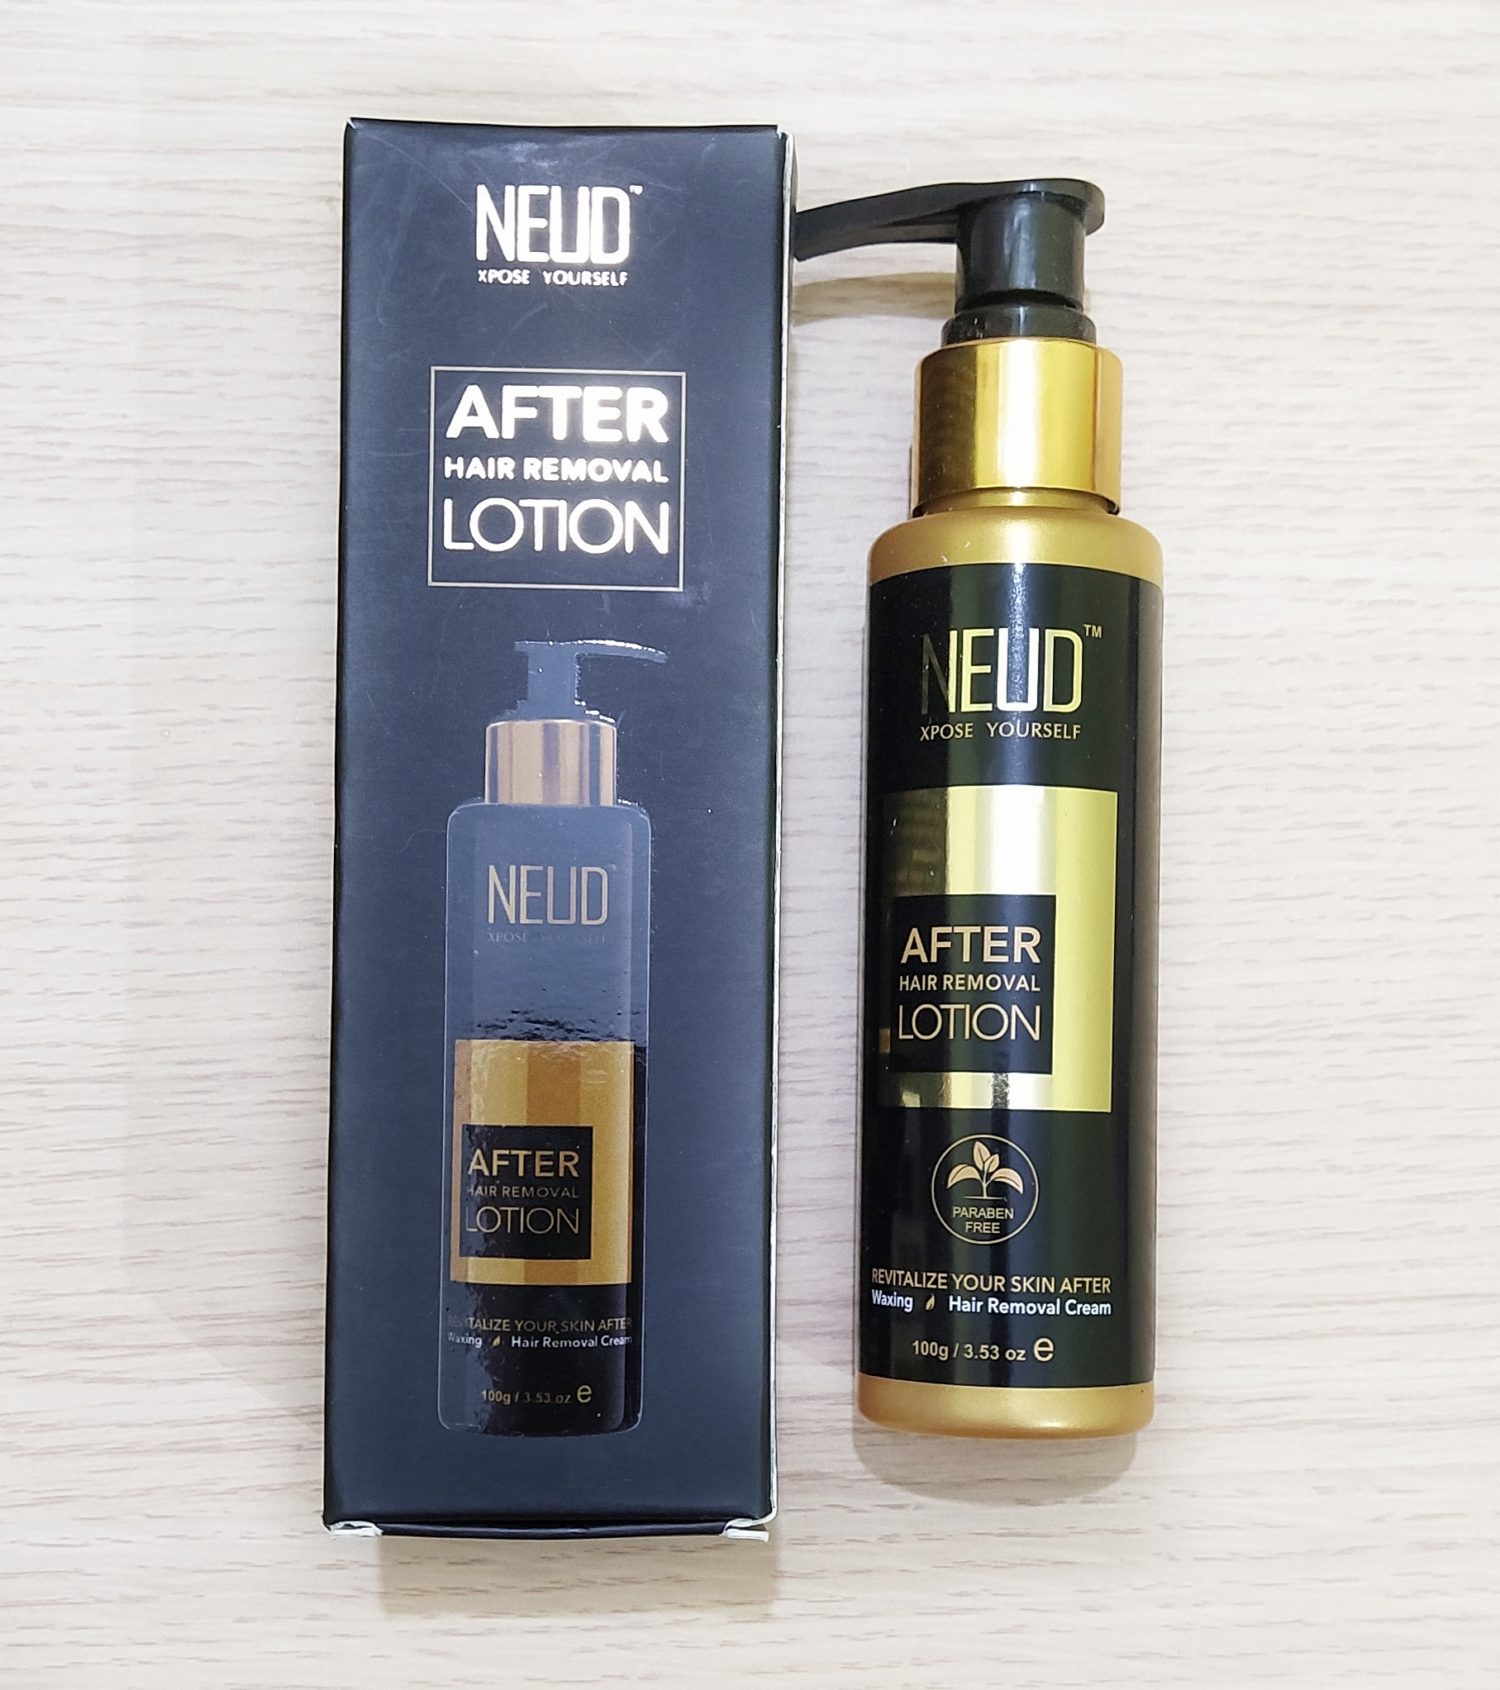 Neud After Removal Lotion Review | Beautifully Me